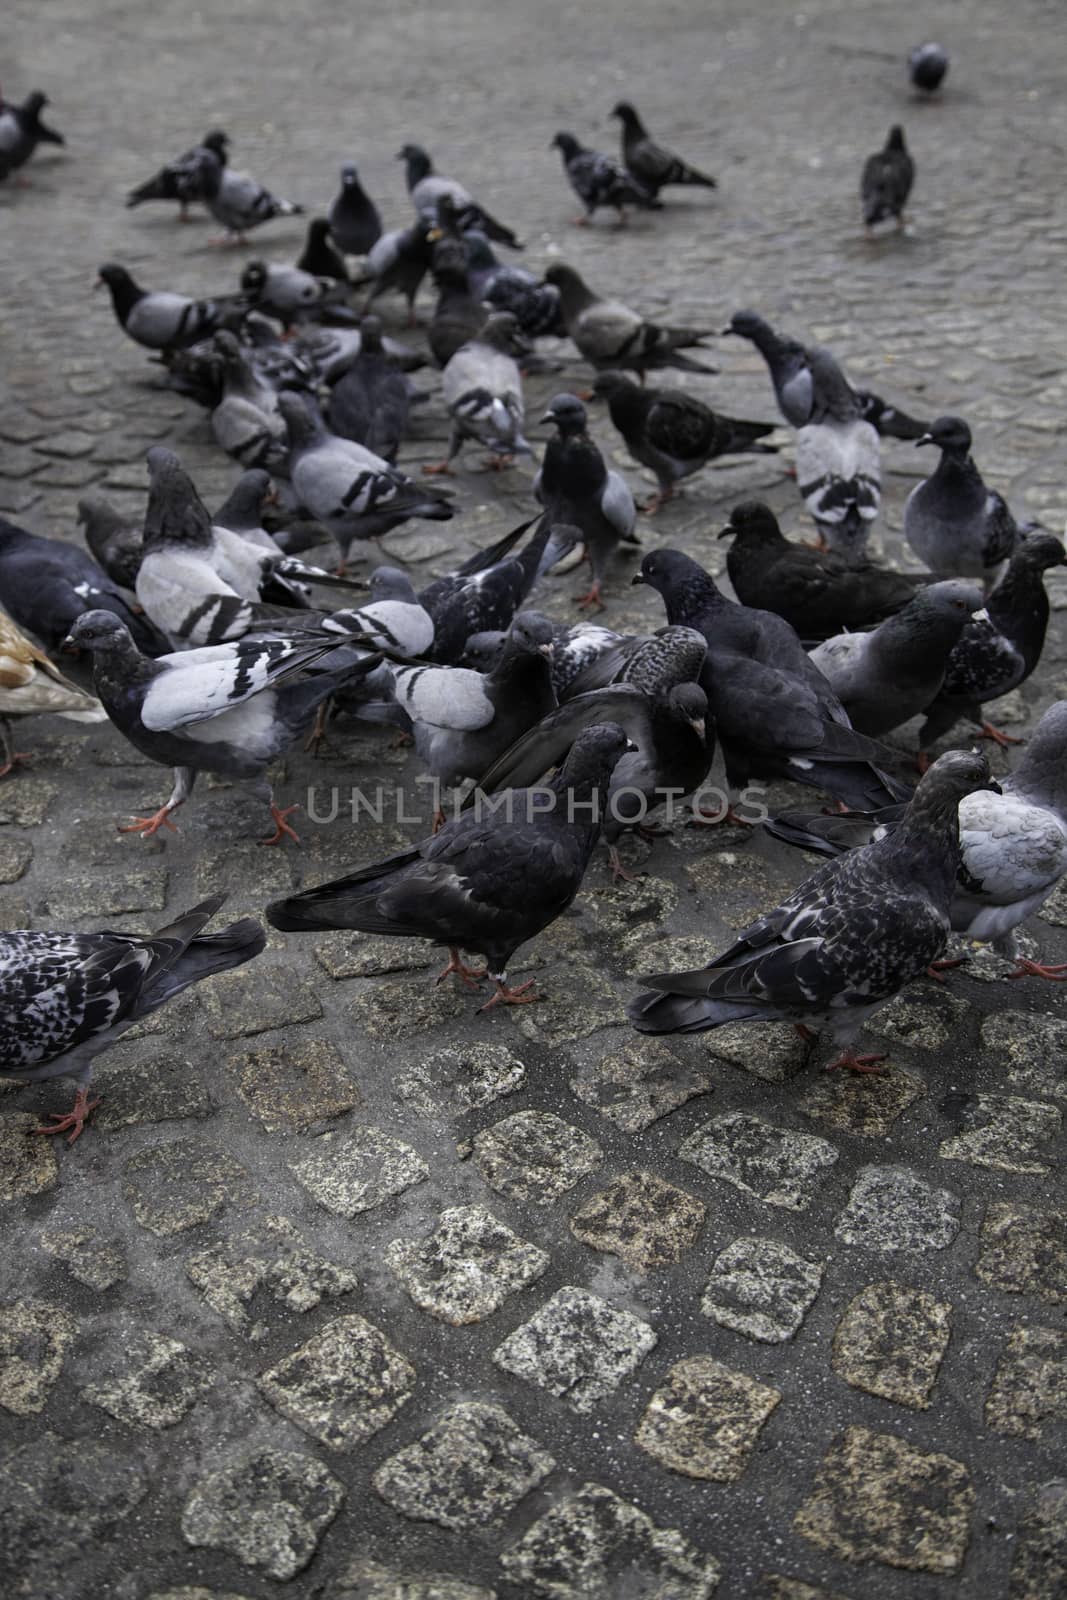 Pigeons in the square by esebene